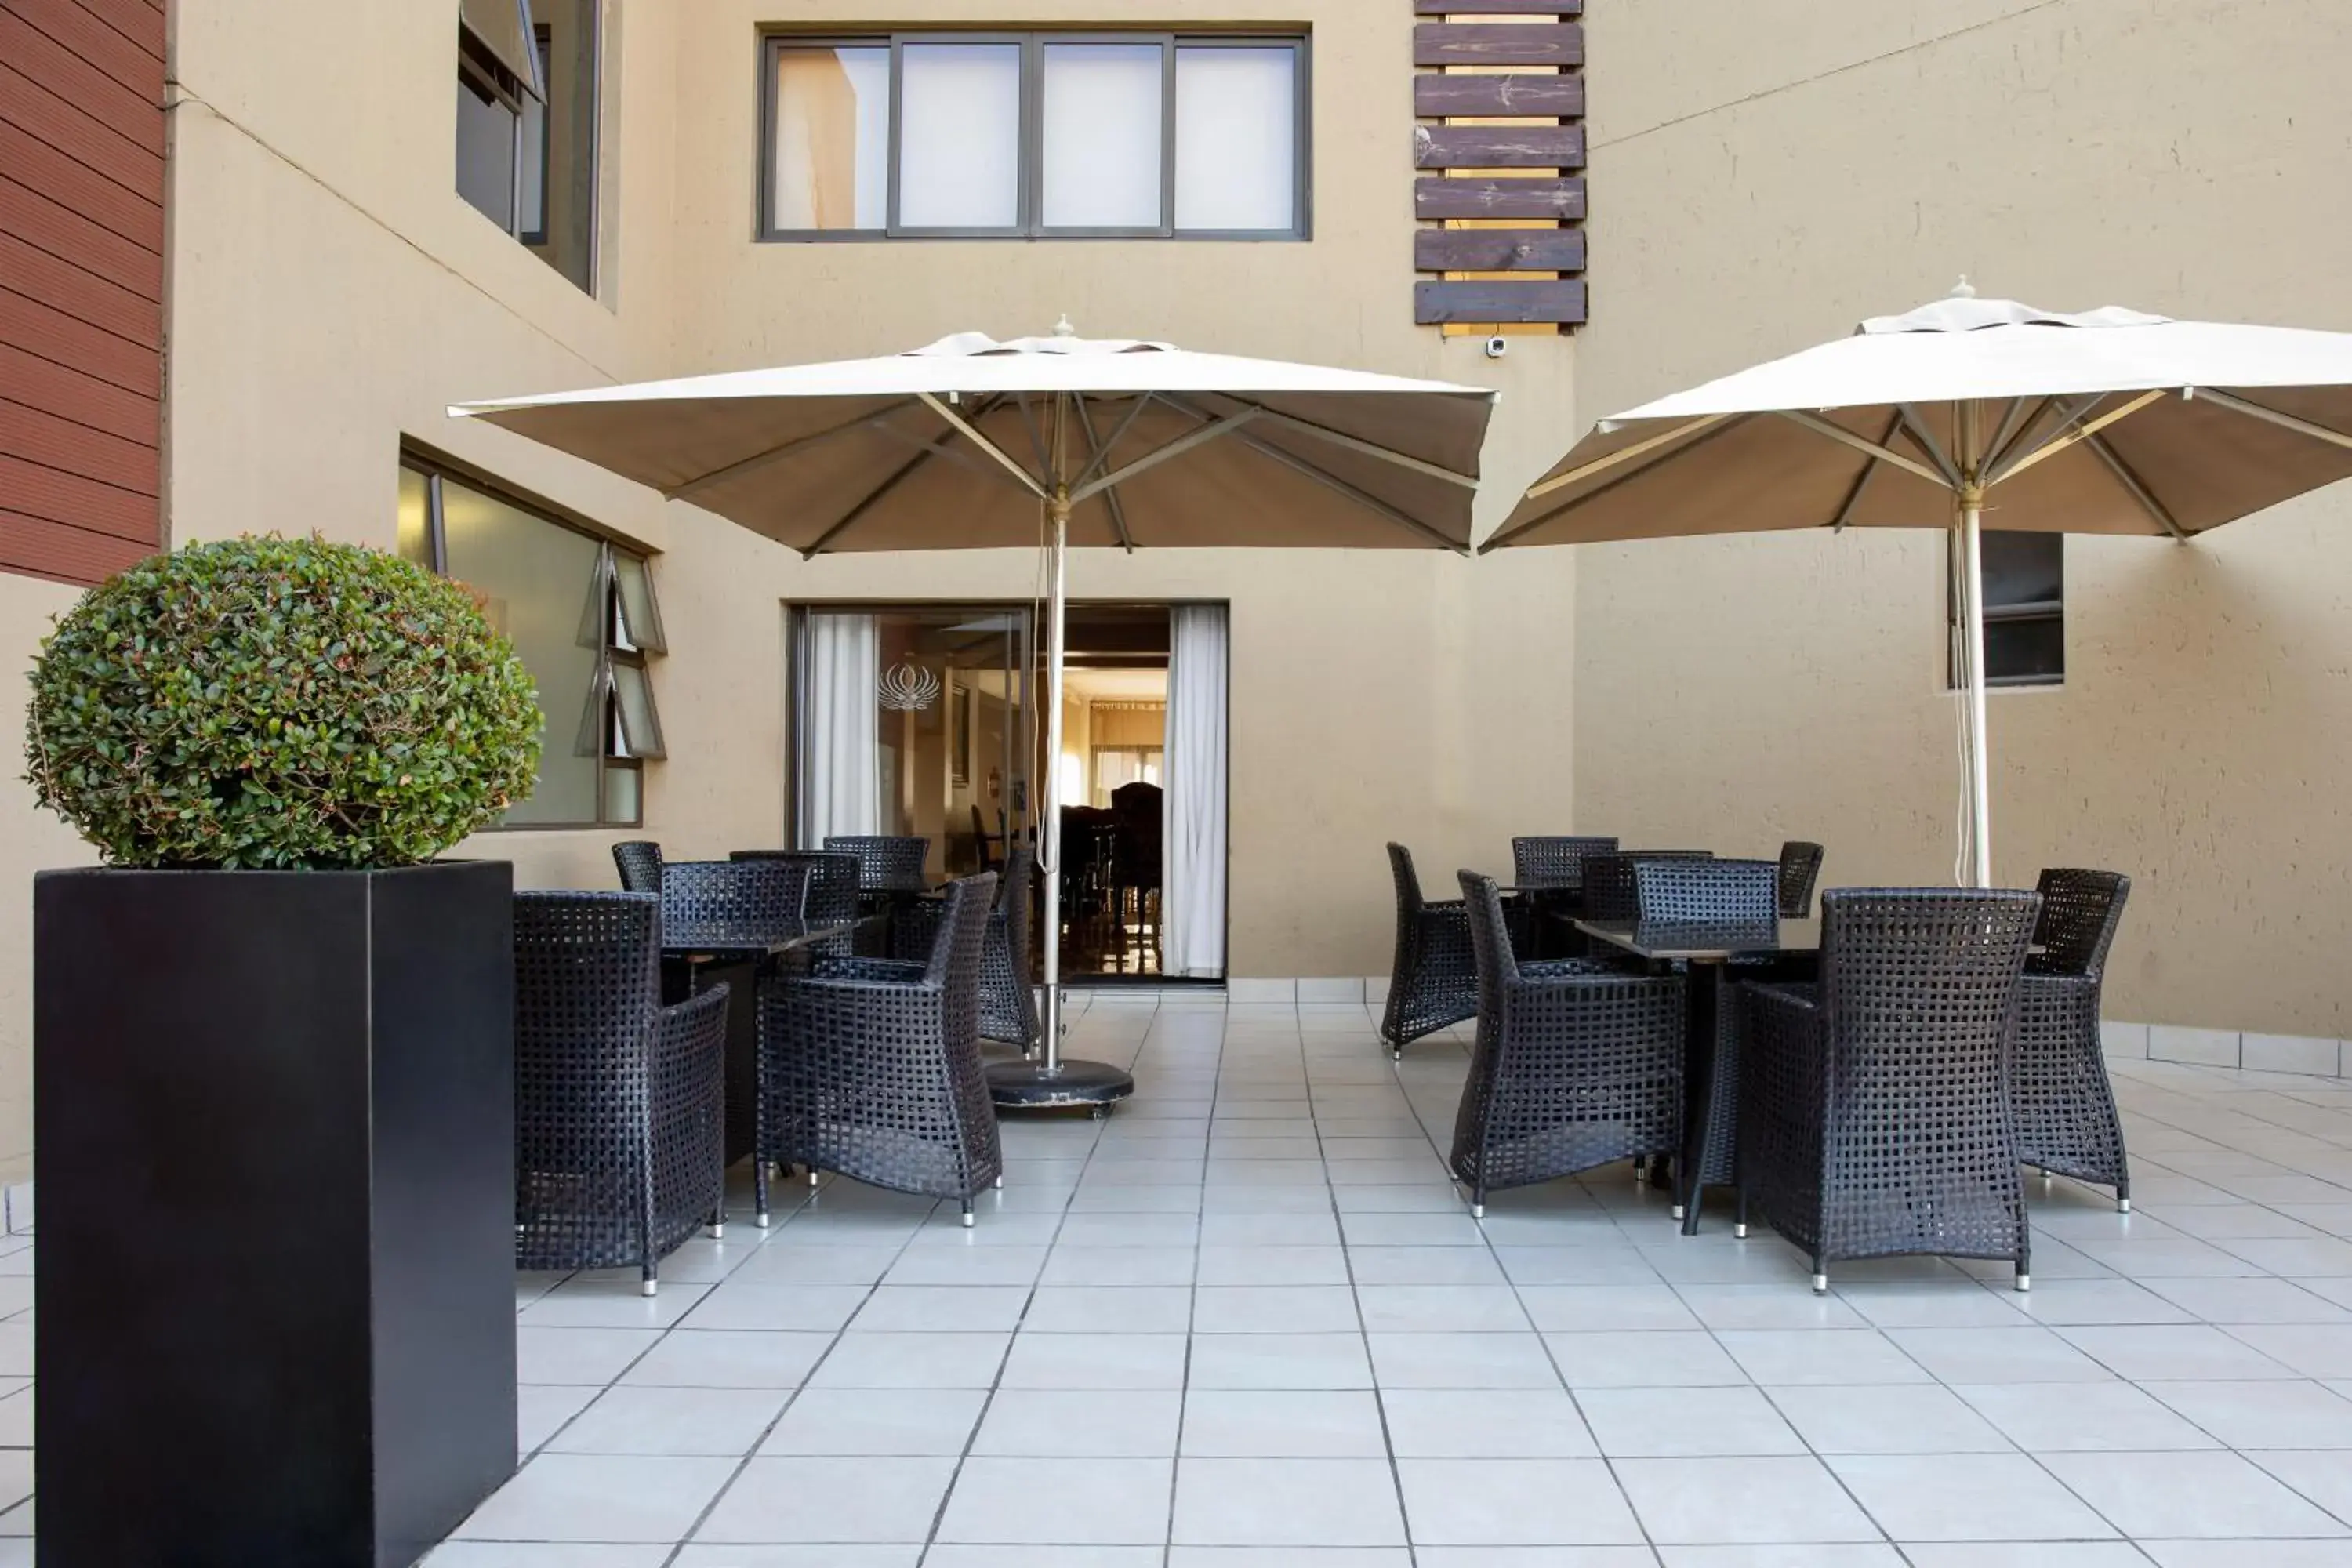 Balcony/Terrace, Patio/Outdoor Area in St Andrews Hotel and Spa